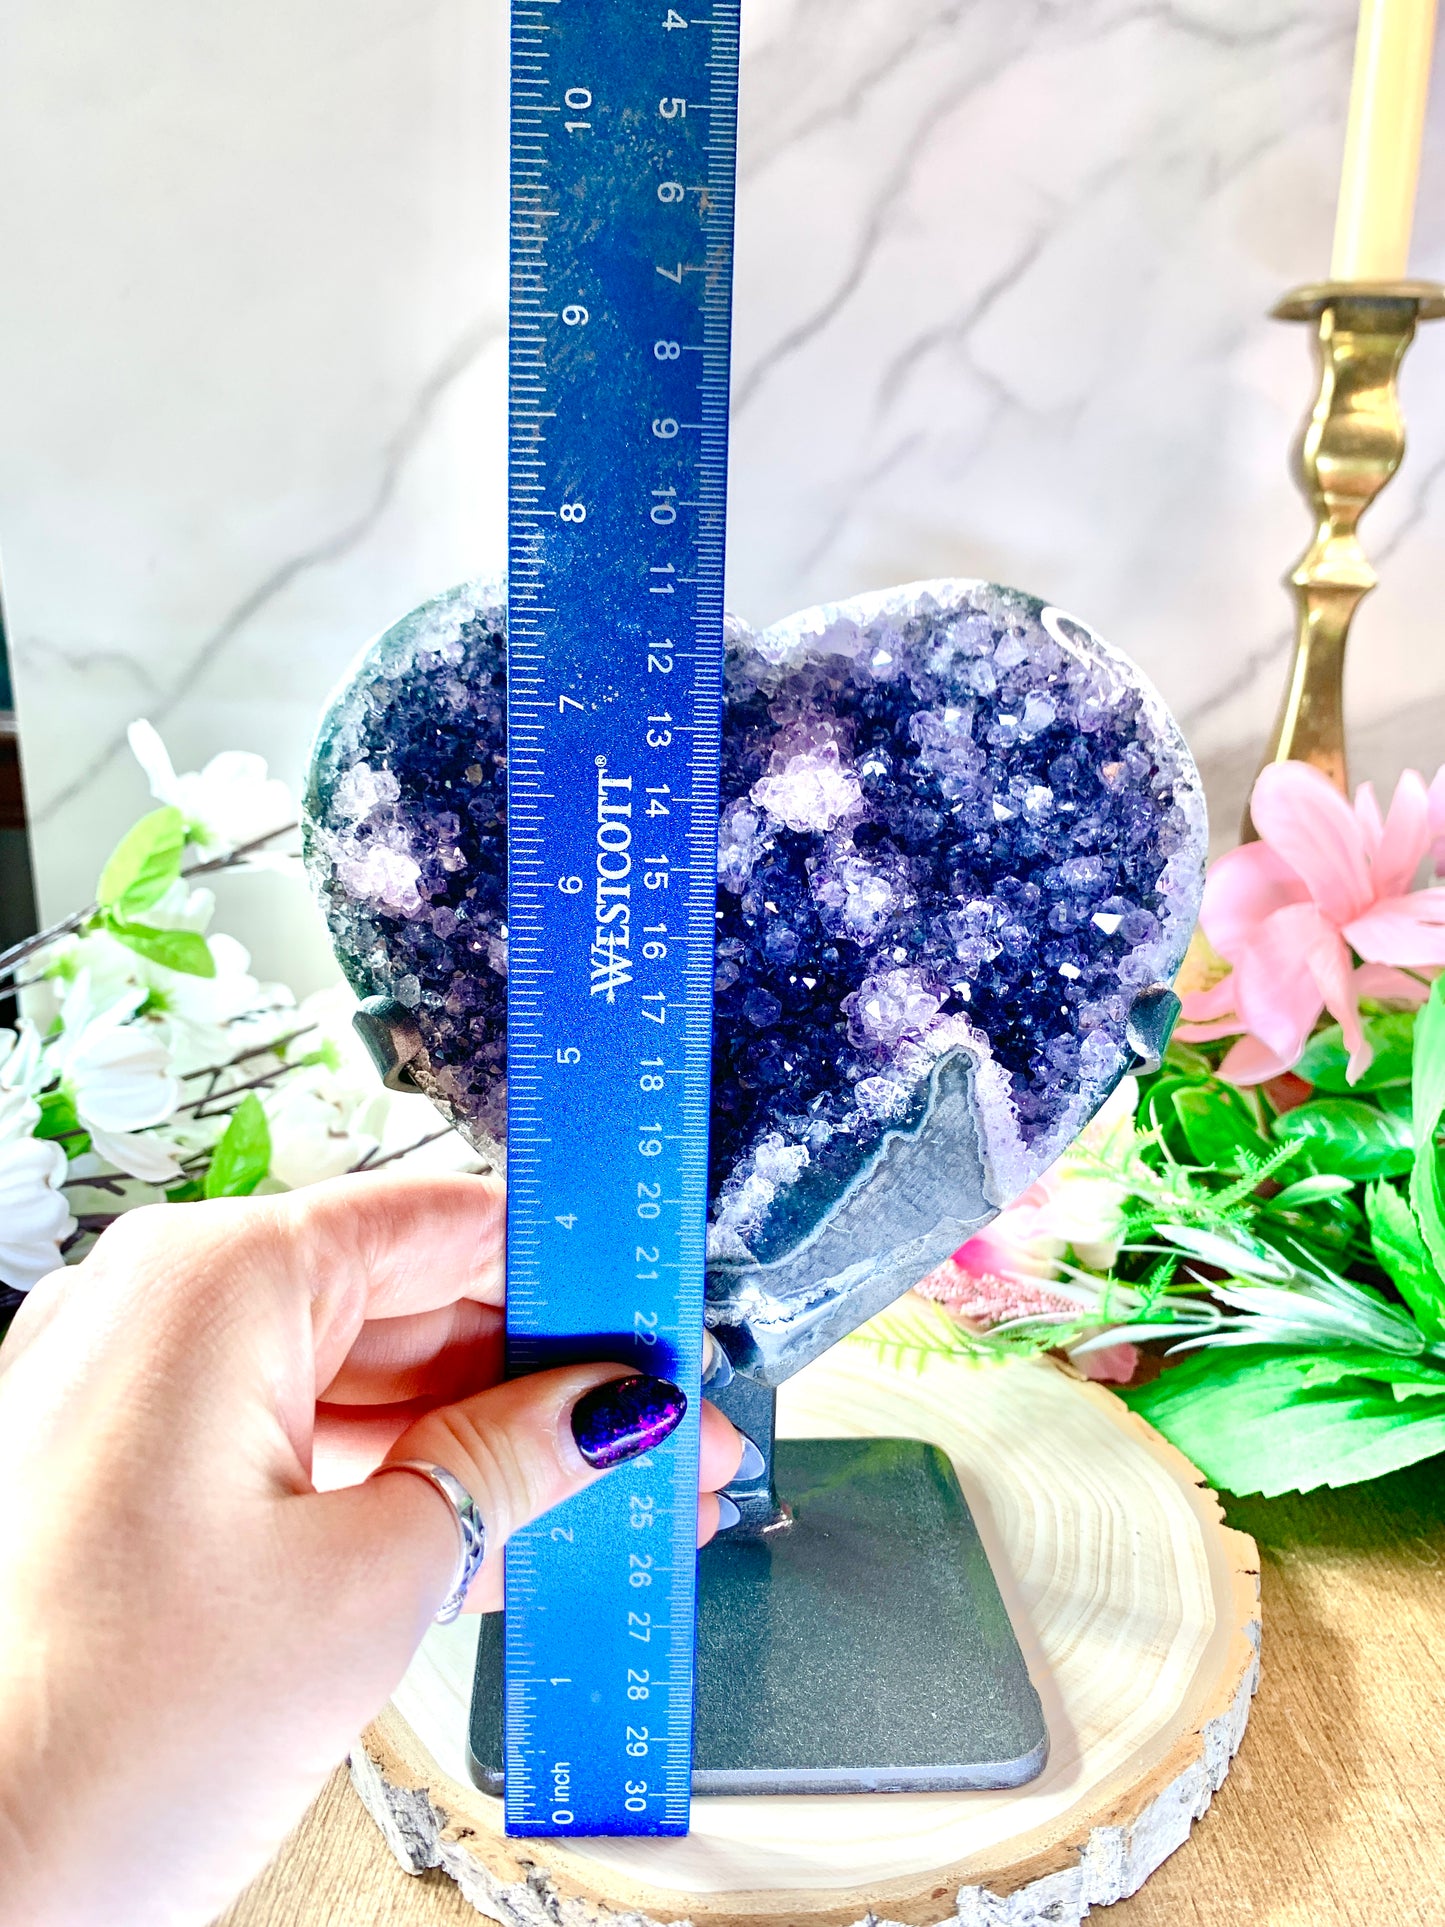 Large Uruguayan Amethyst heart on stand